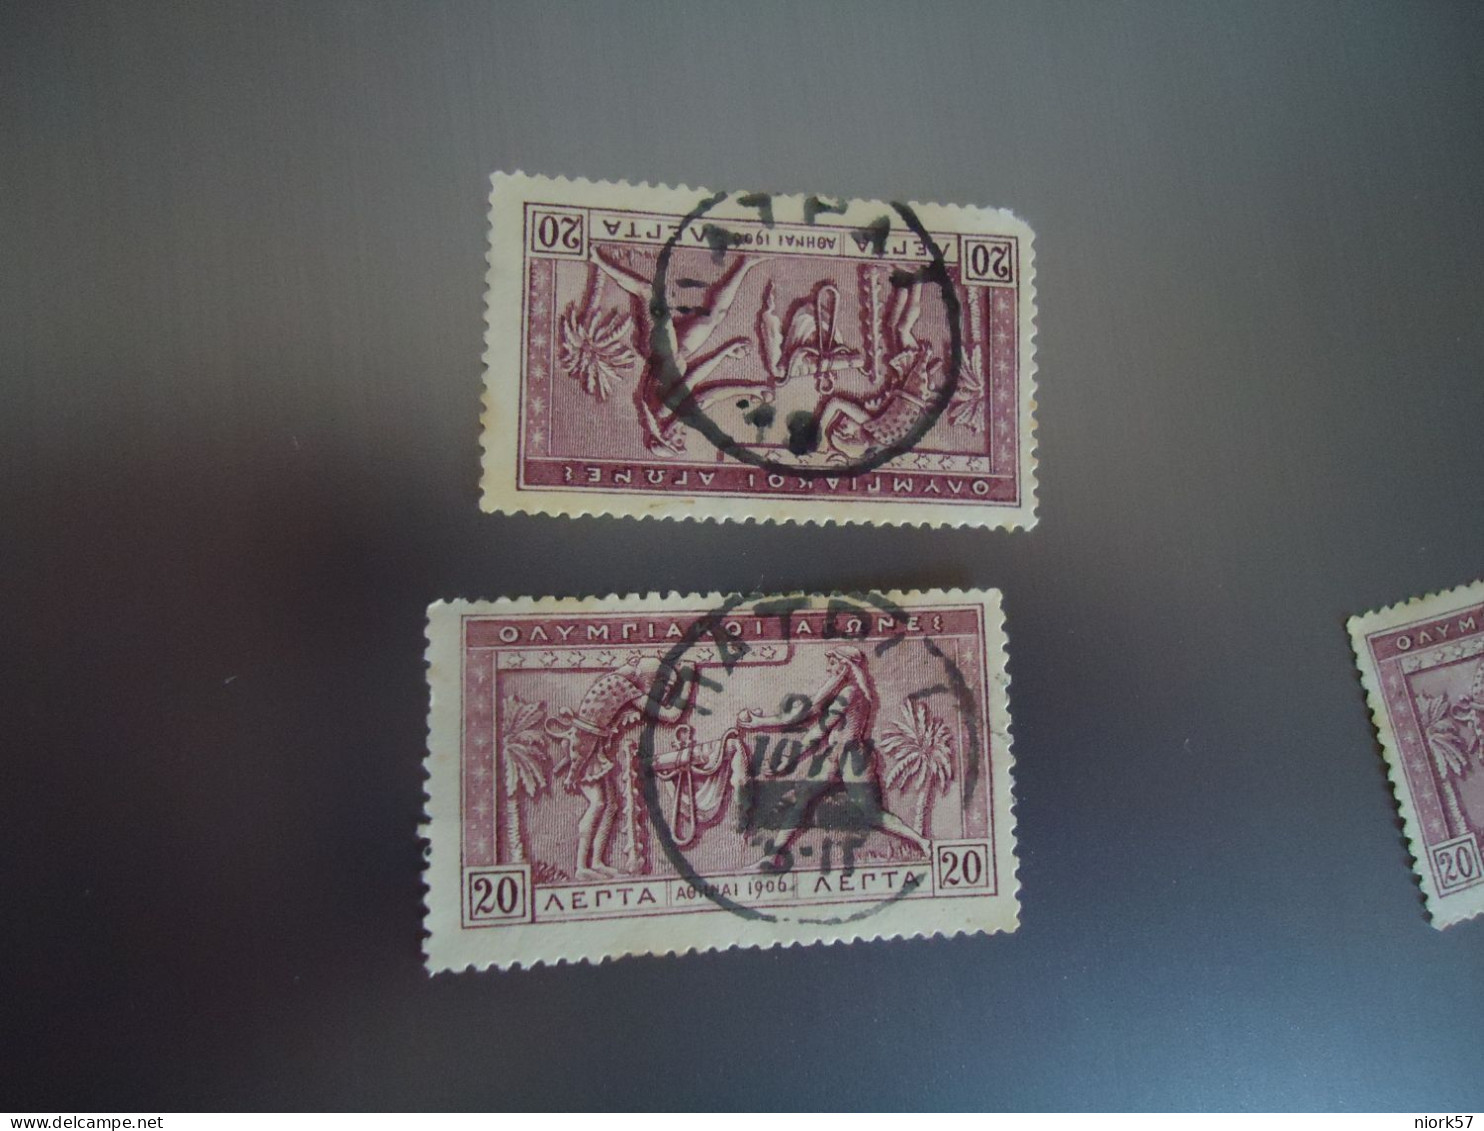 GREECE USED STAMPS  2 OLYMPIC GAMES POSTMARK  PATRAI  ΠΑΤΡΑ - Affrancature Meccaniche Rosse (EMA)